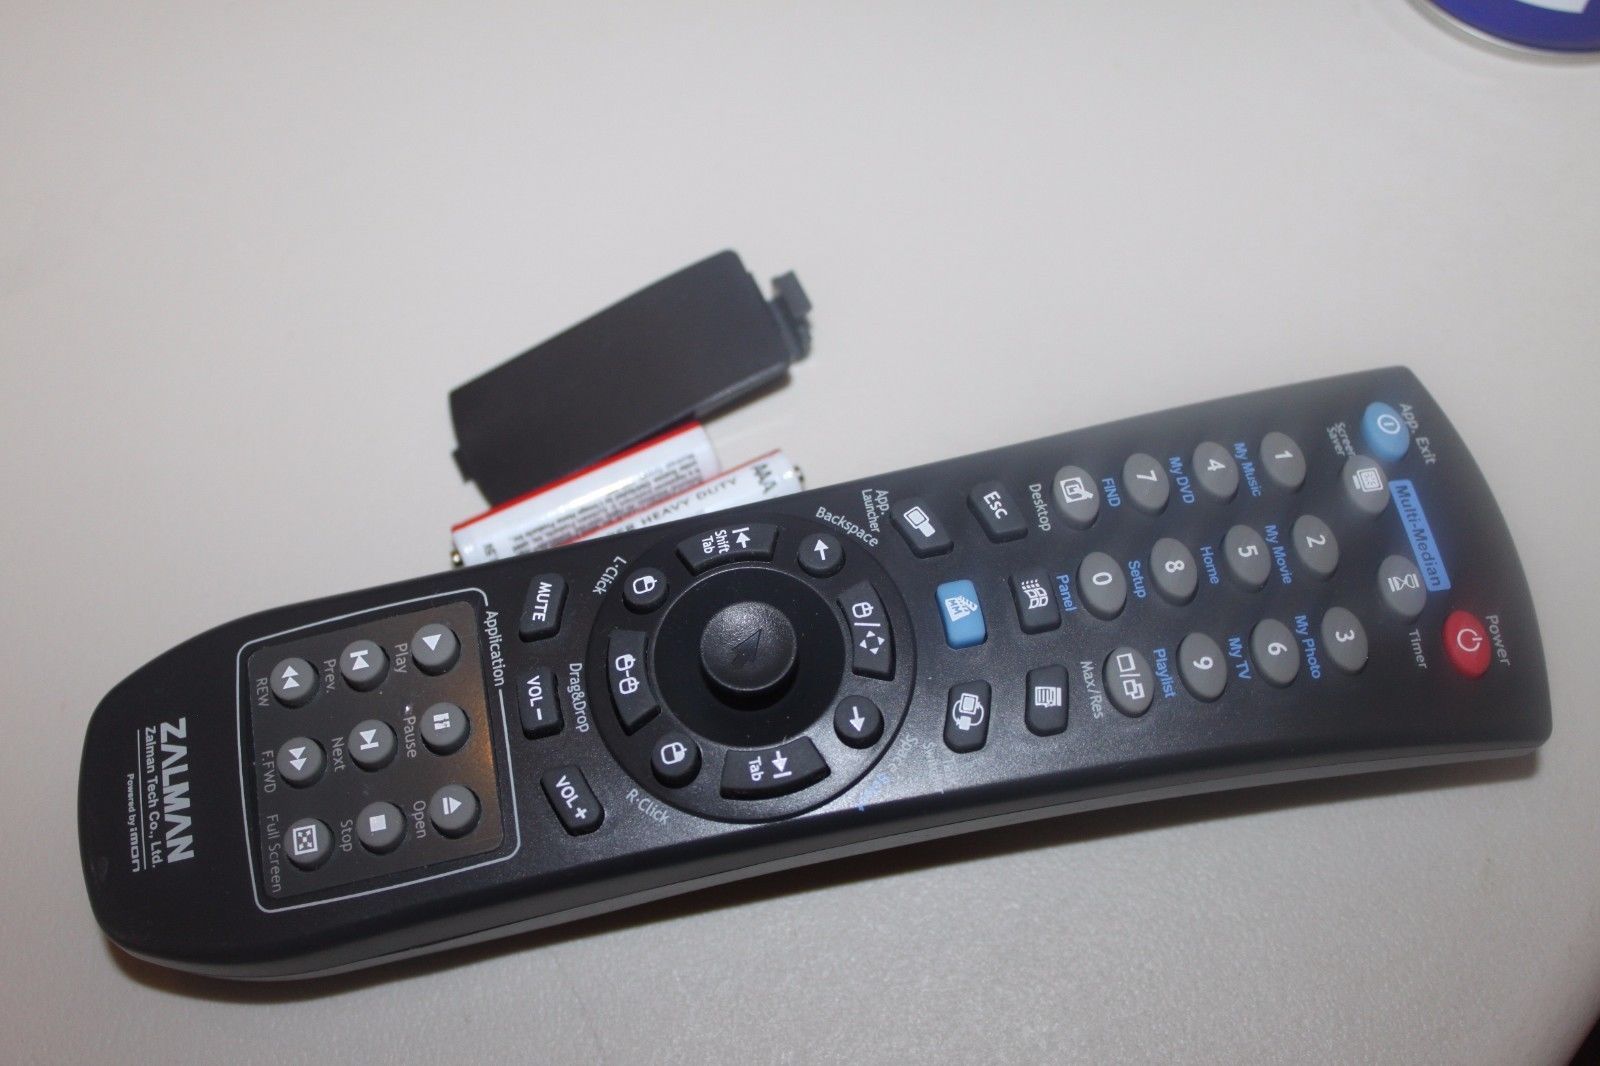 ZALMAN HOME THEATER Remote Control W/BATTERIES TESTED - $16.74